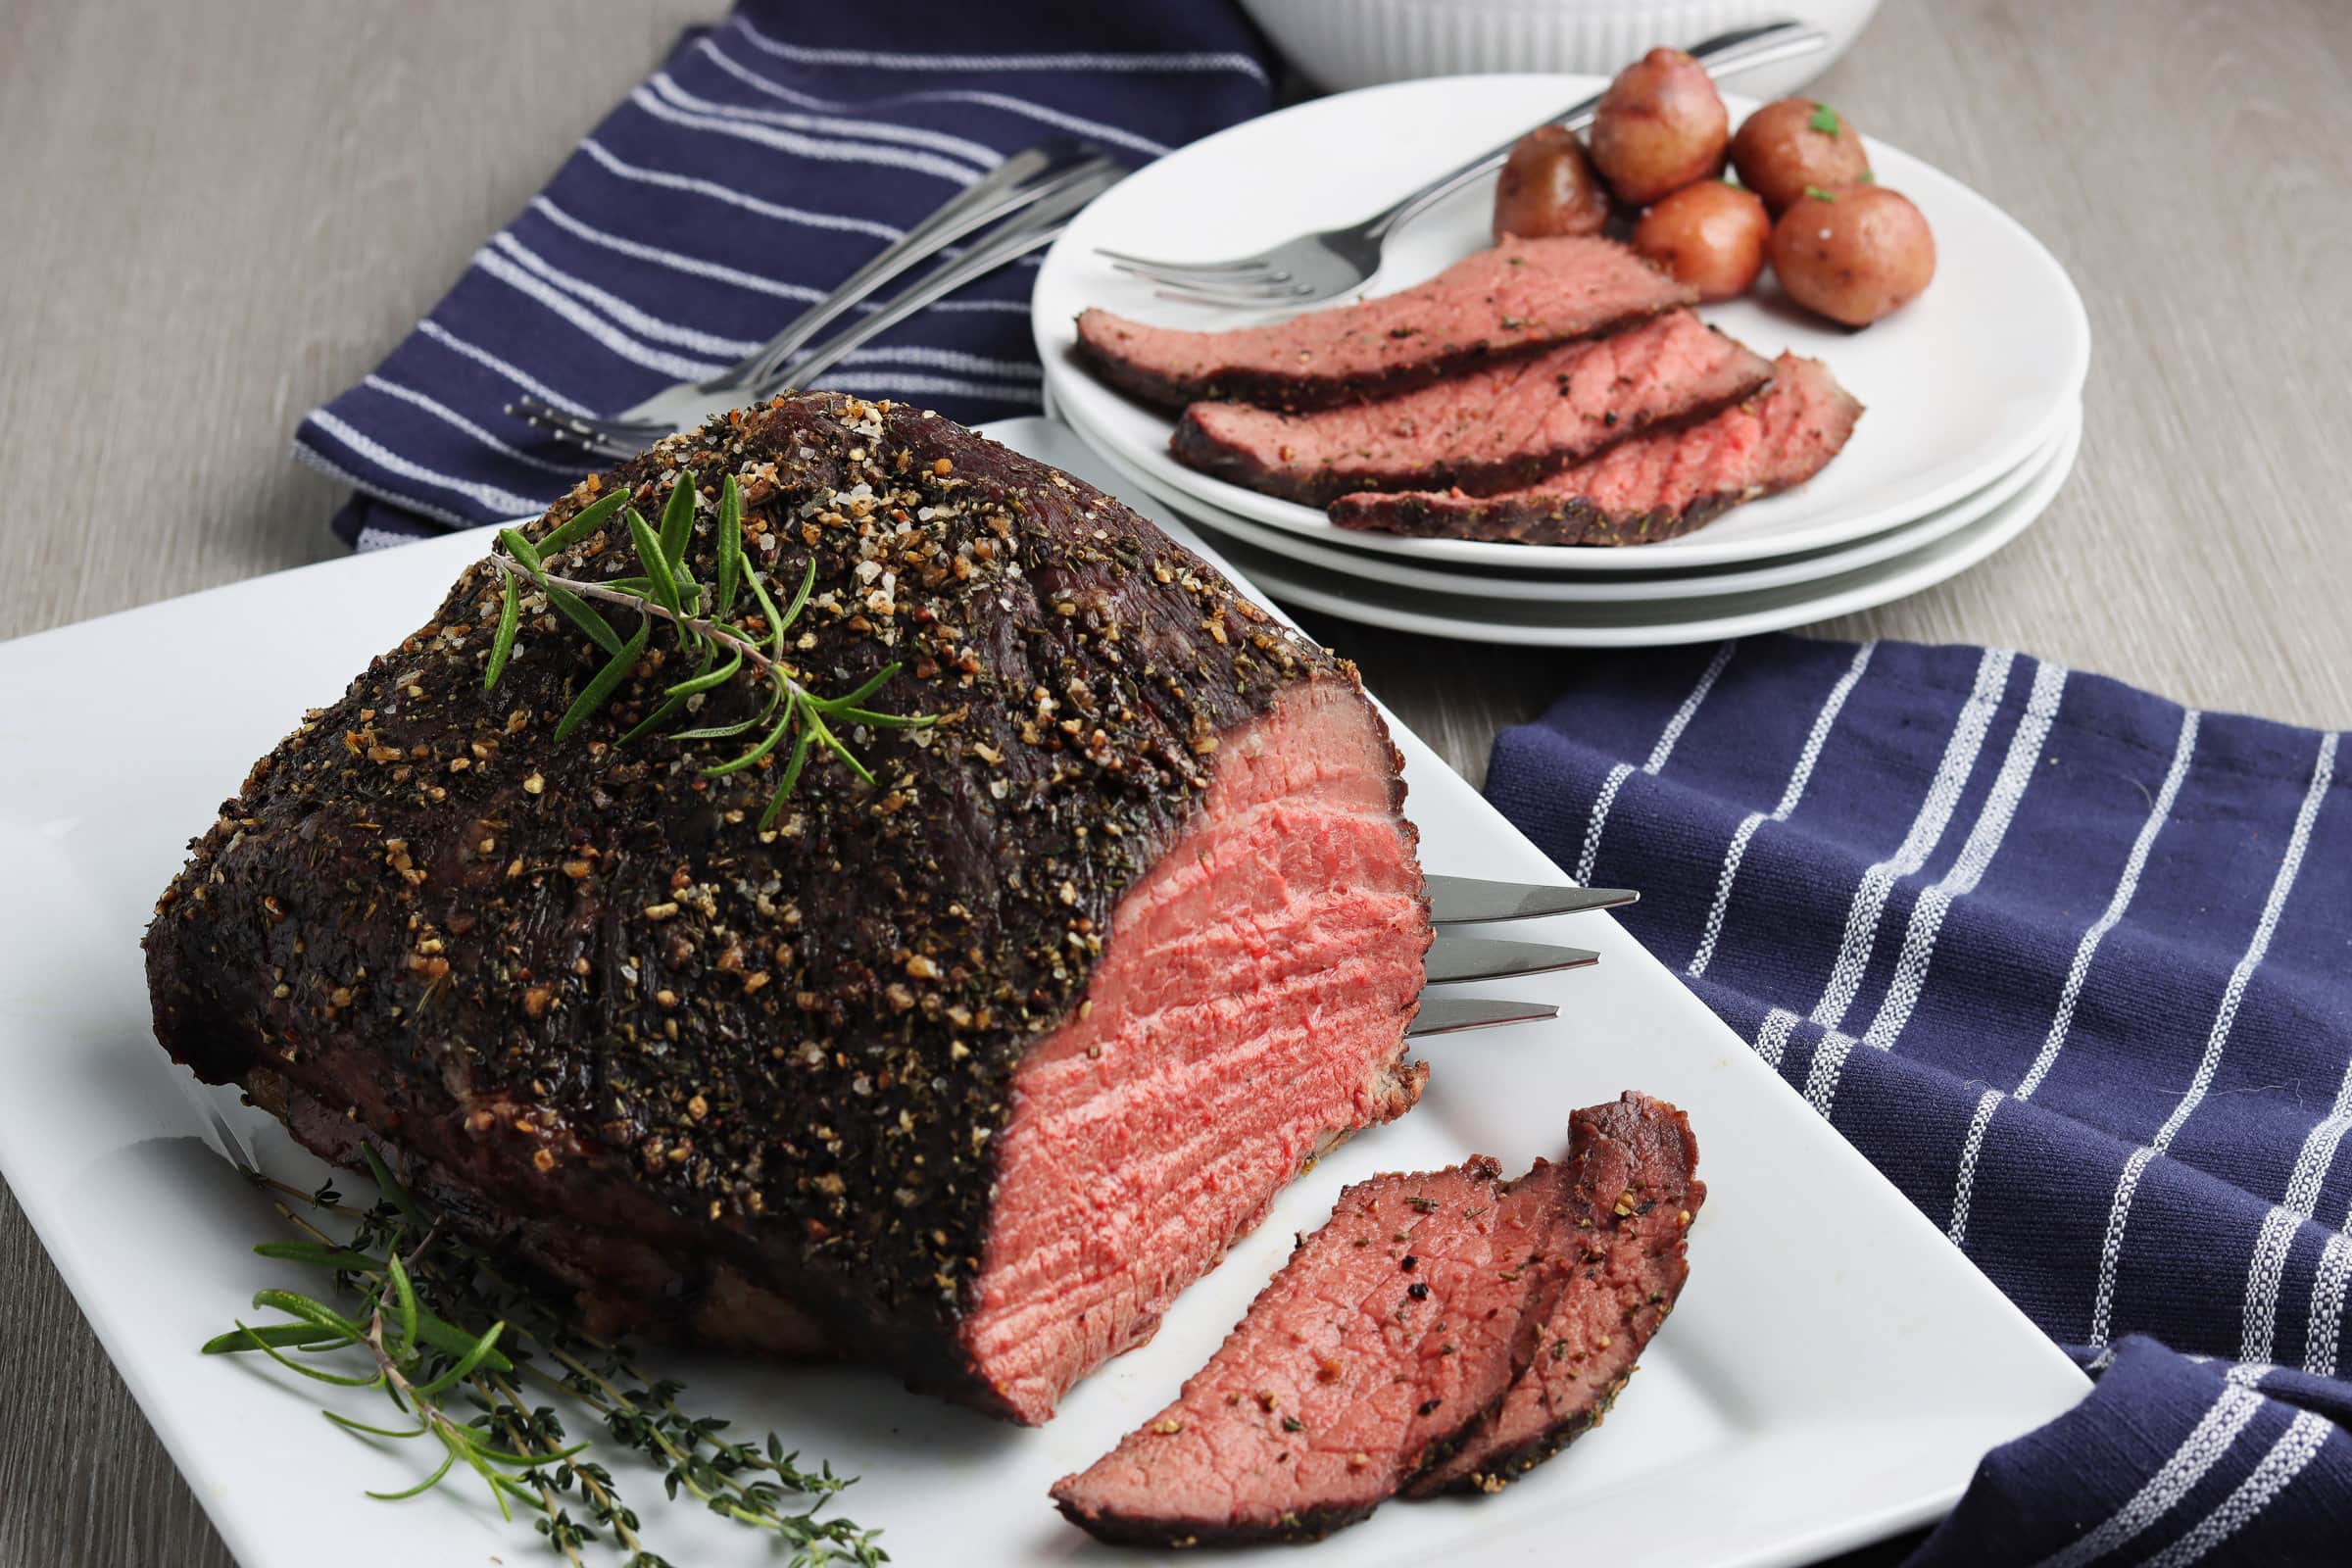 https://www.healthy-delicious.com/wp-content/uploads/2022/11/how-to-roast-beef-in-the-oven-5.jpg